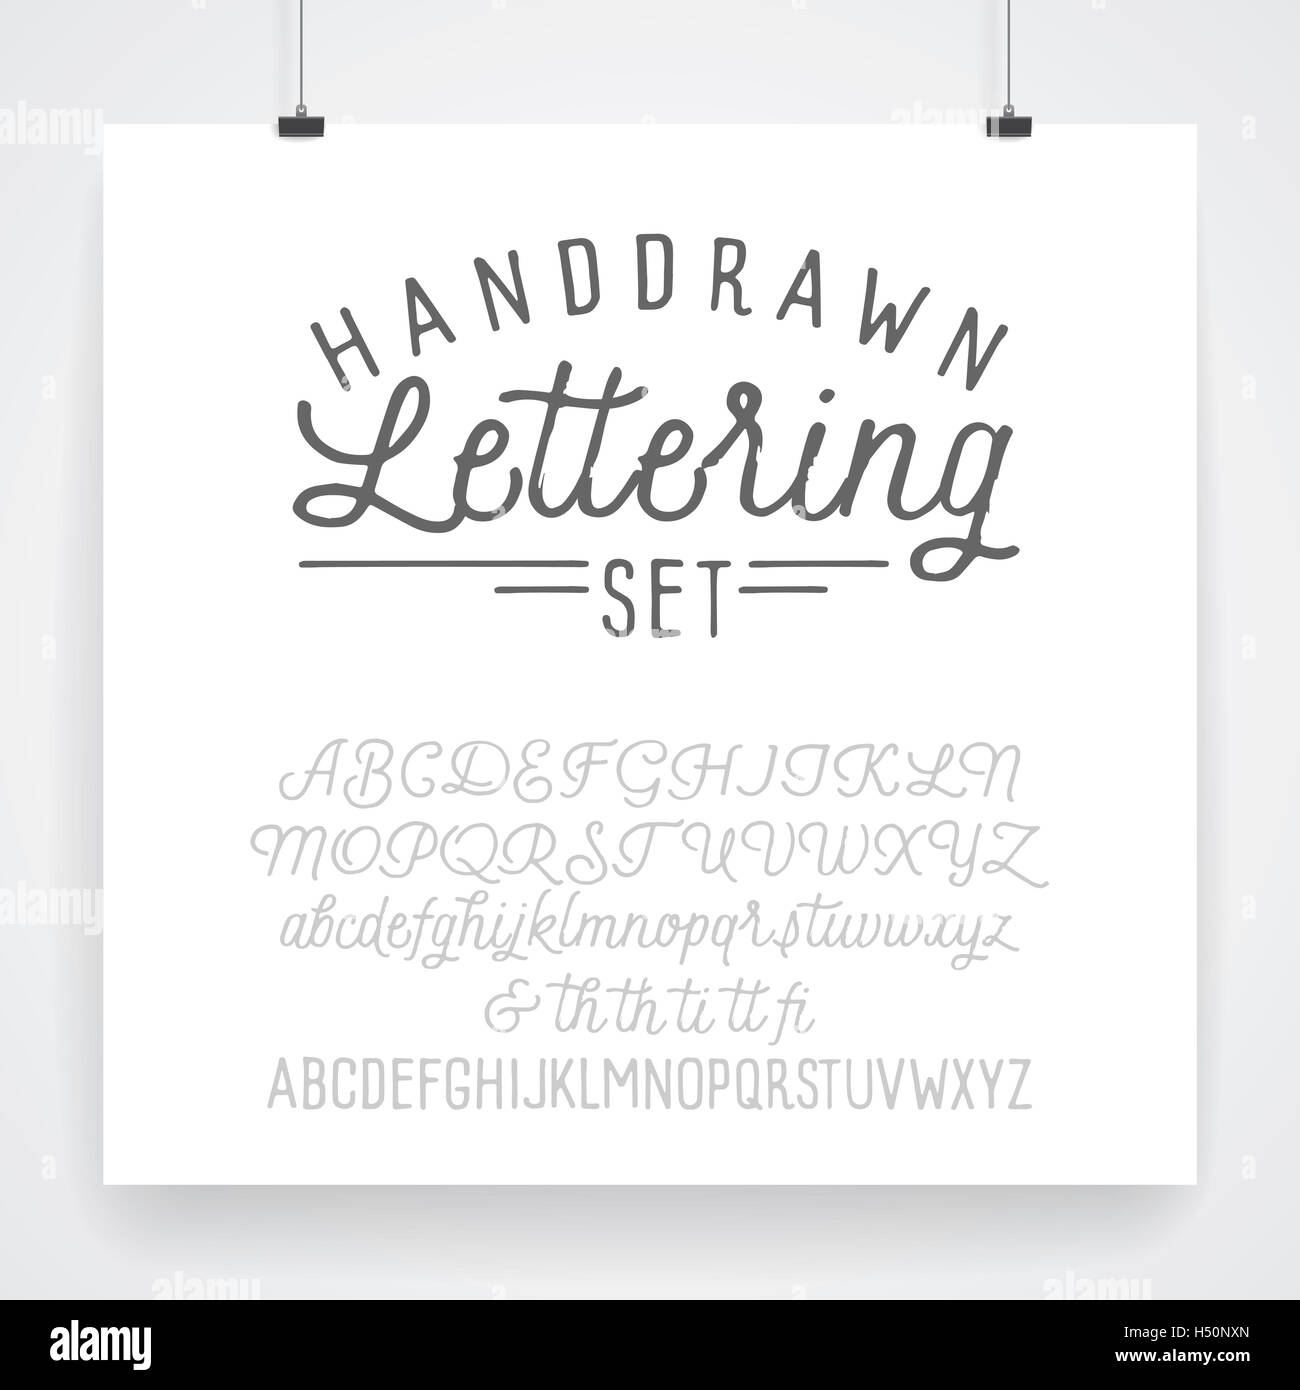 Vintage hand drawn type. Set of two fonts for lettering Stock Photo - Alamy